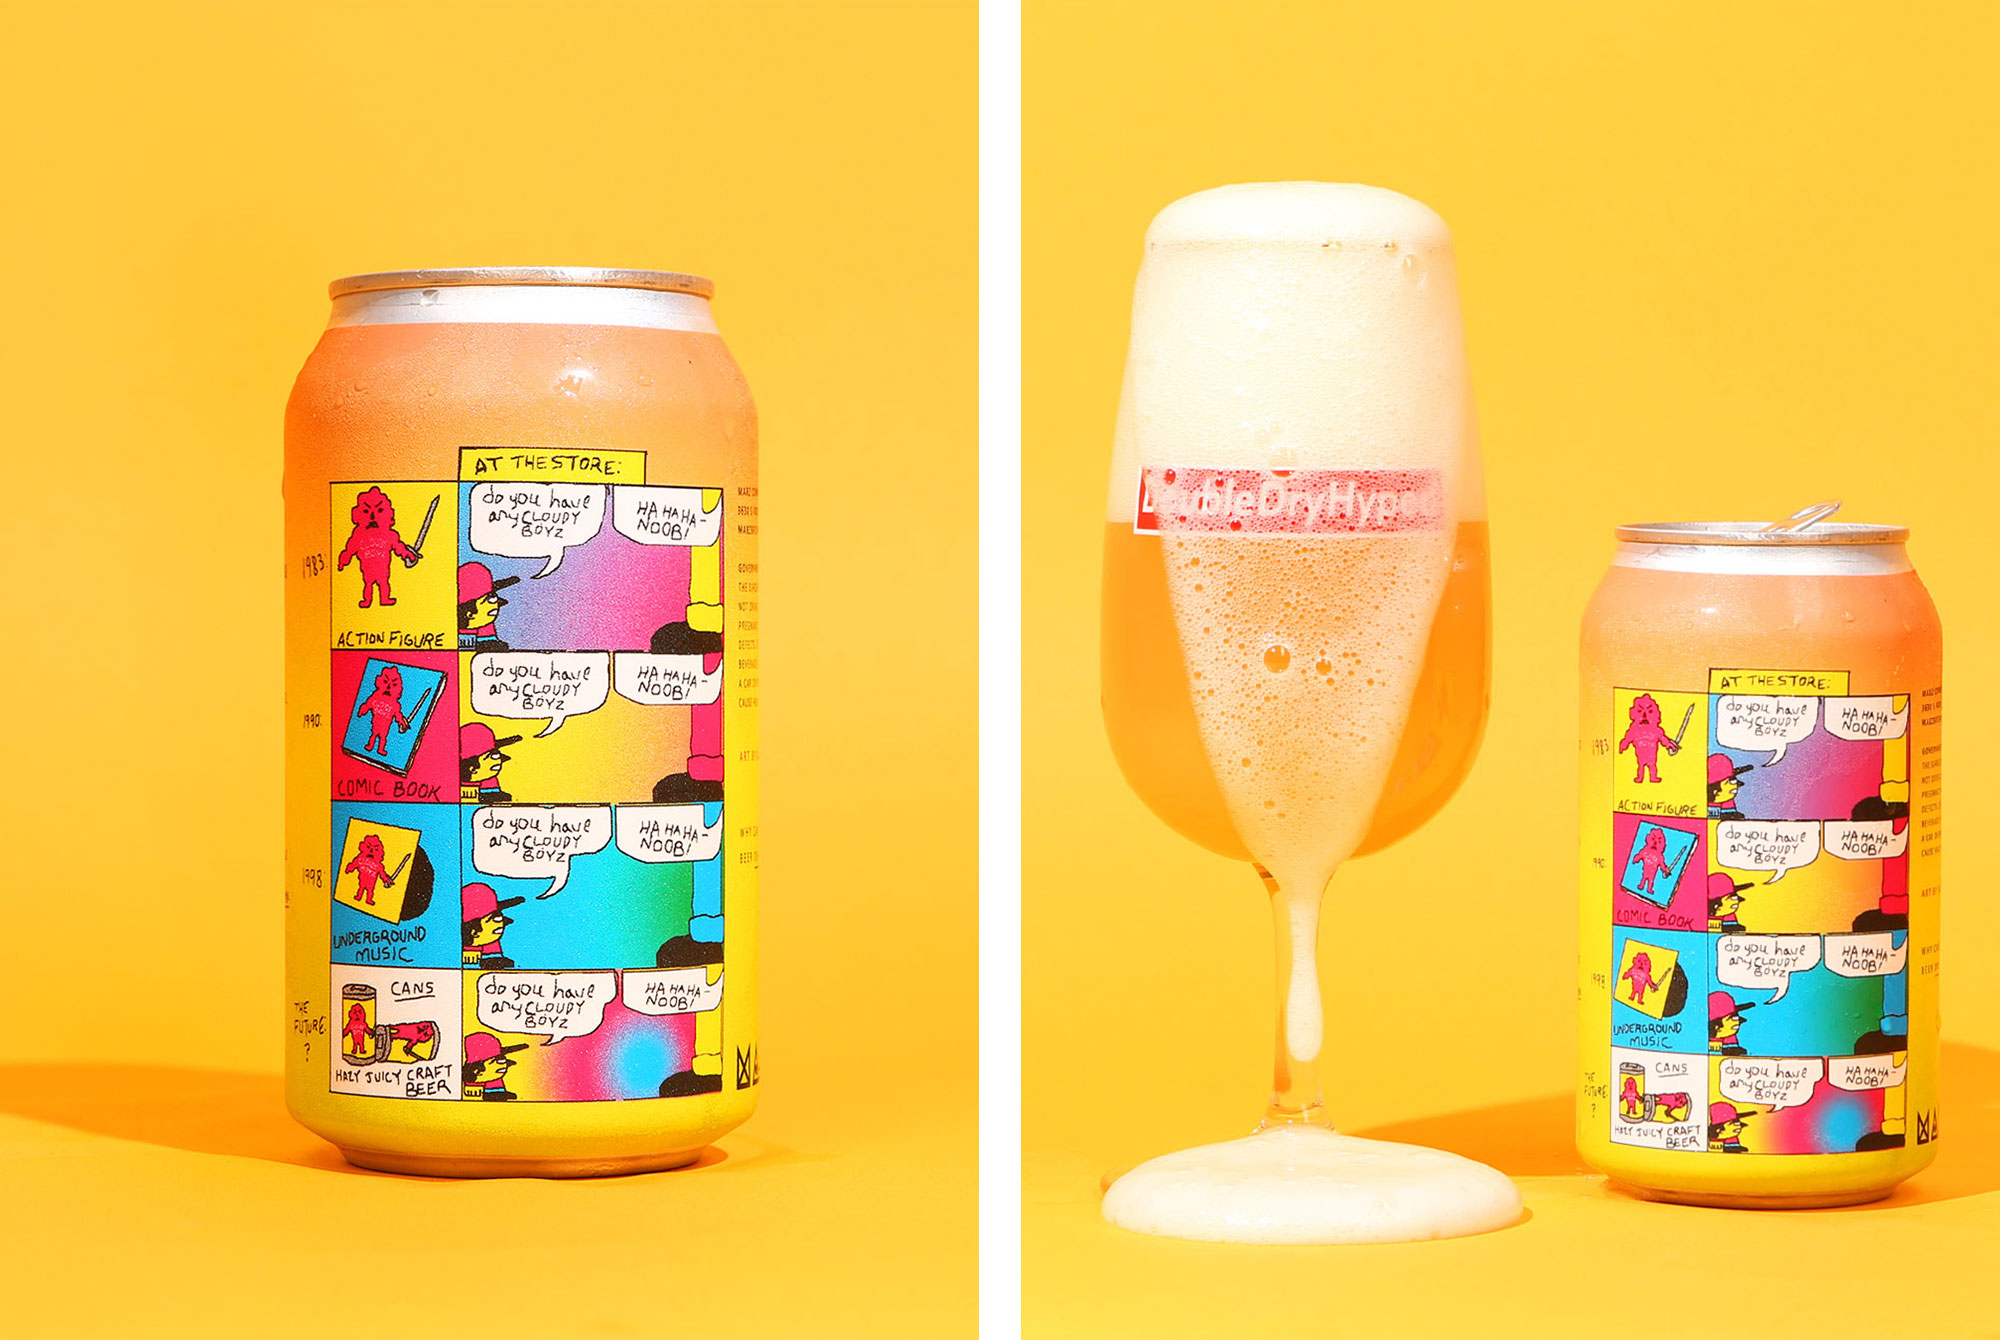 Meet the Artist Who Designed Our Favorite Beer Label of 2018